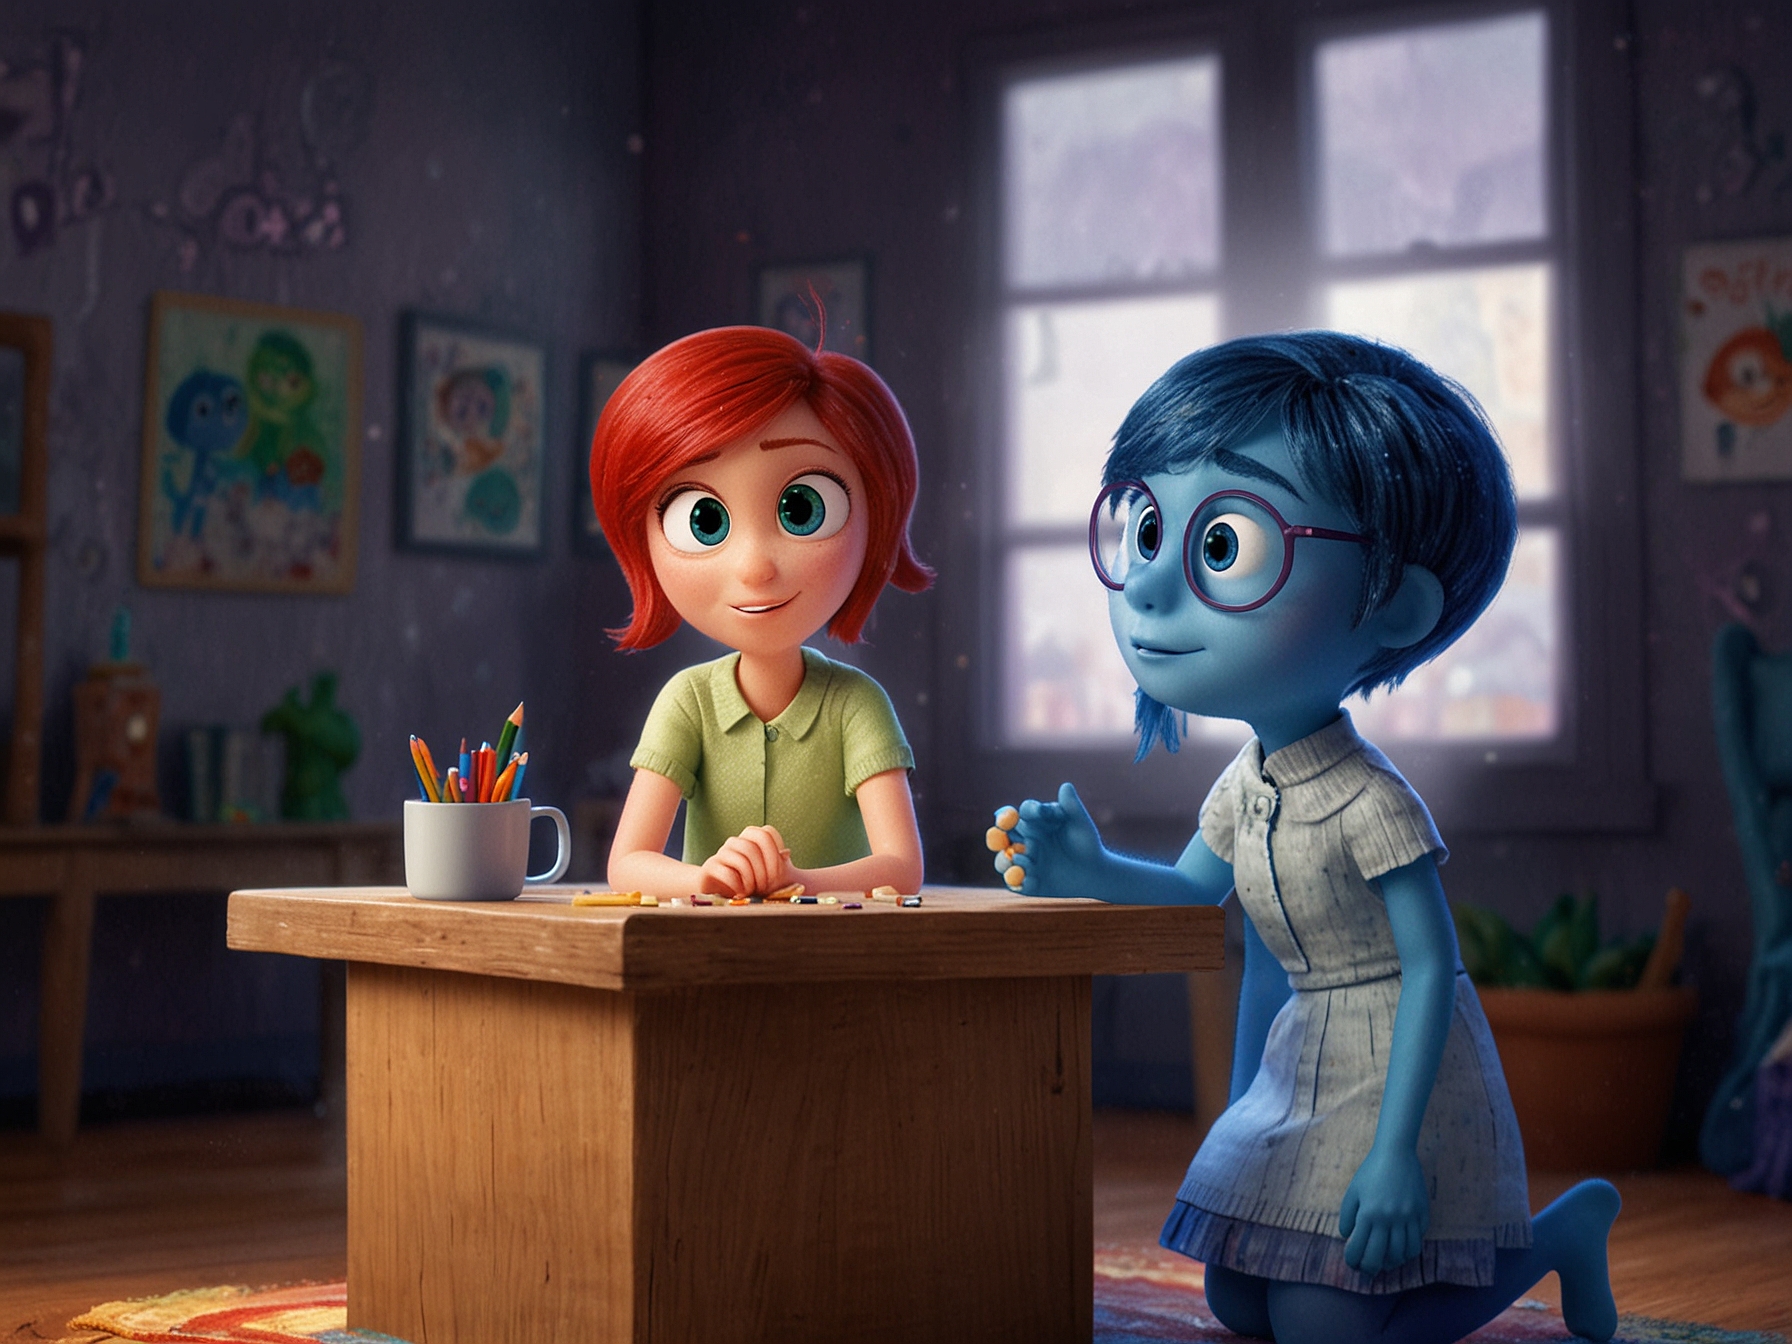 A vibrant scene from 'Inside Out 2' showing new and returning emotional characters interacting, highlighting the film's exploration of complex emotional themes.